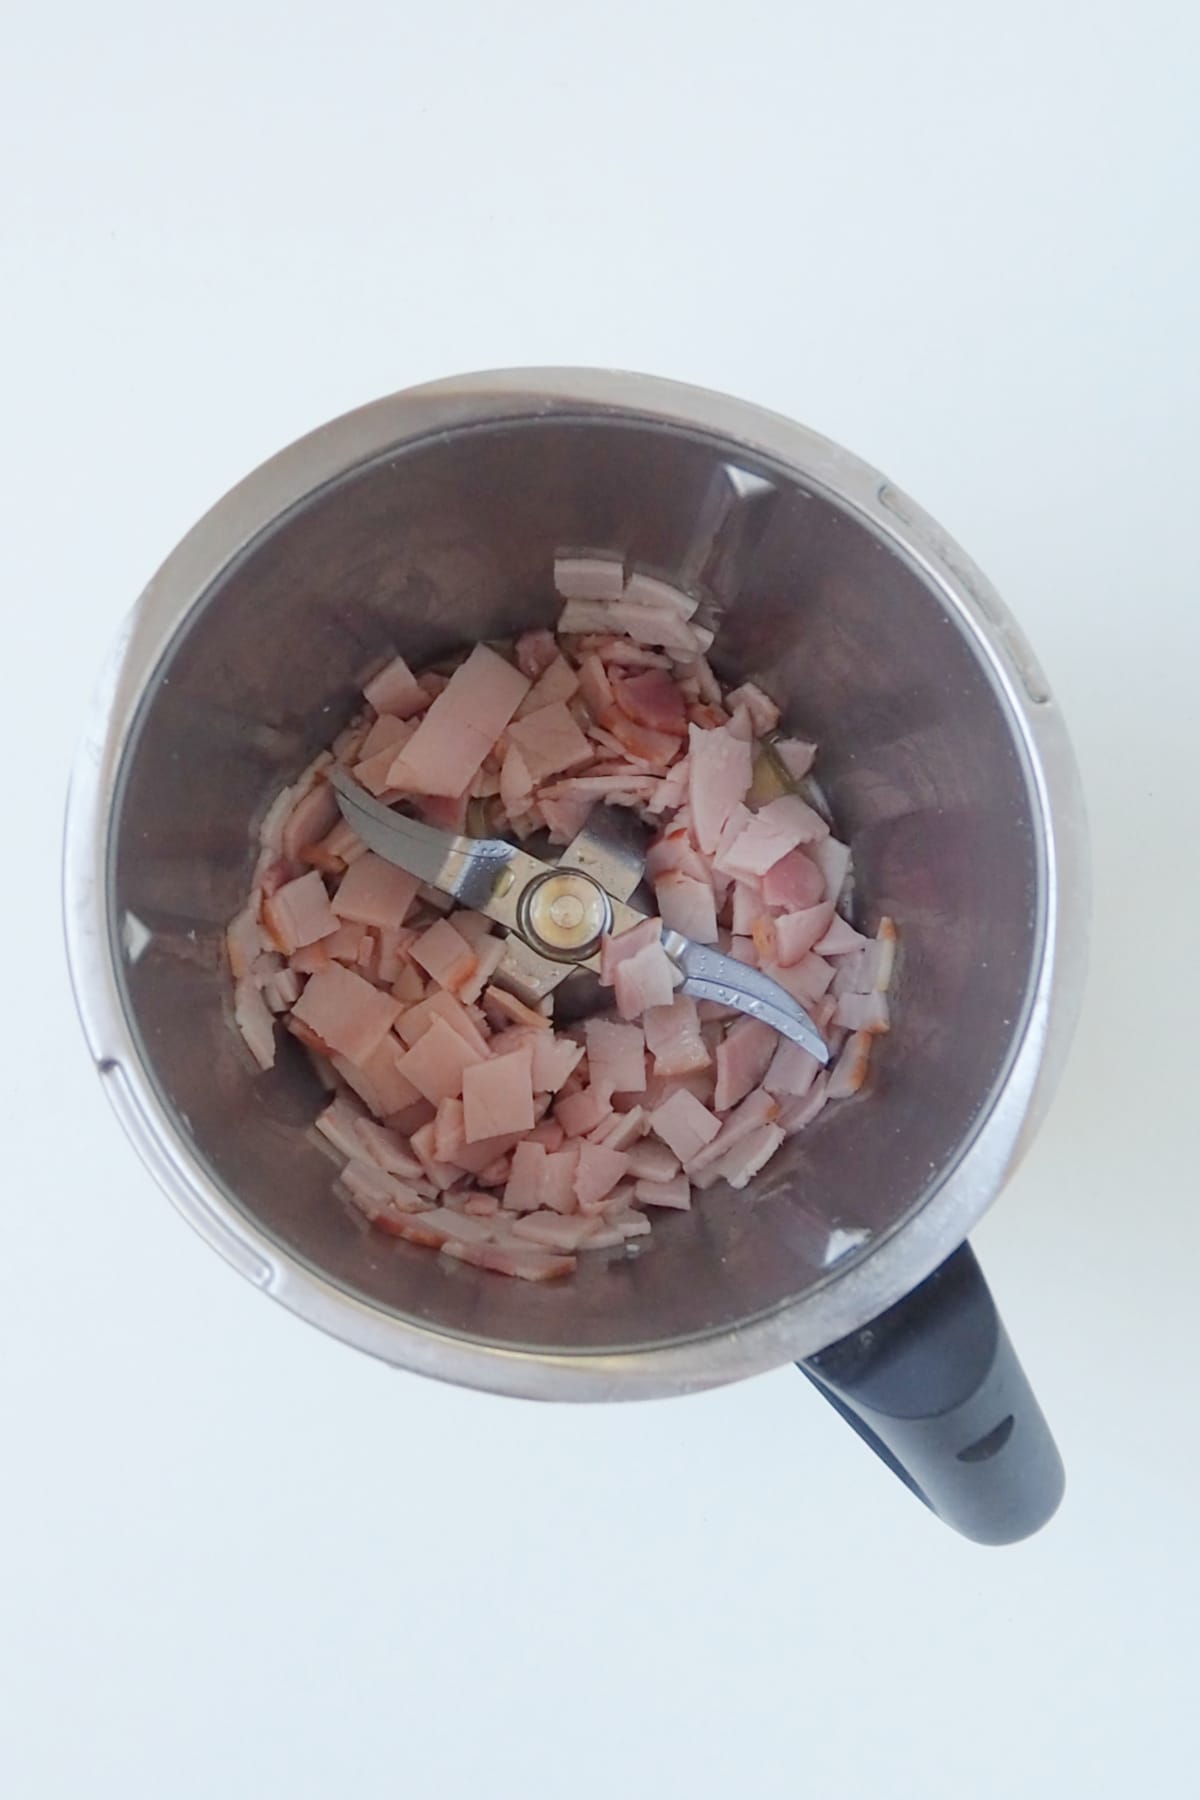 Cooked bacon and garlic in a thermomix bowl.